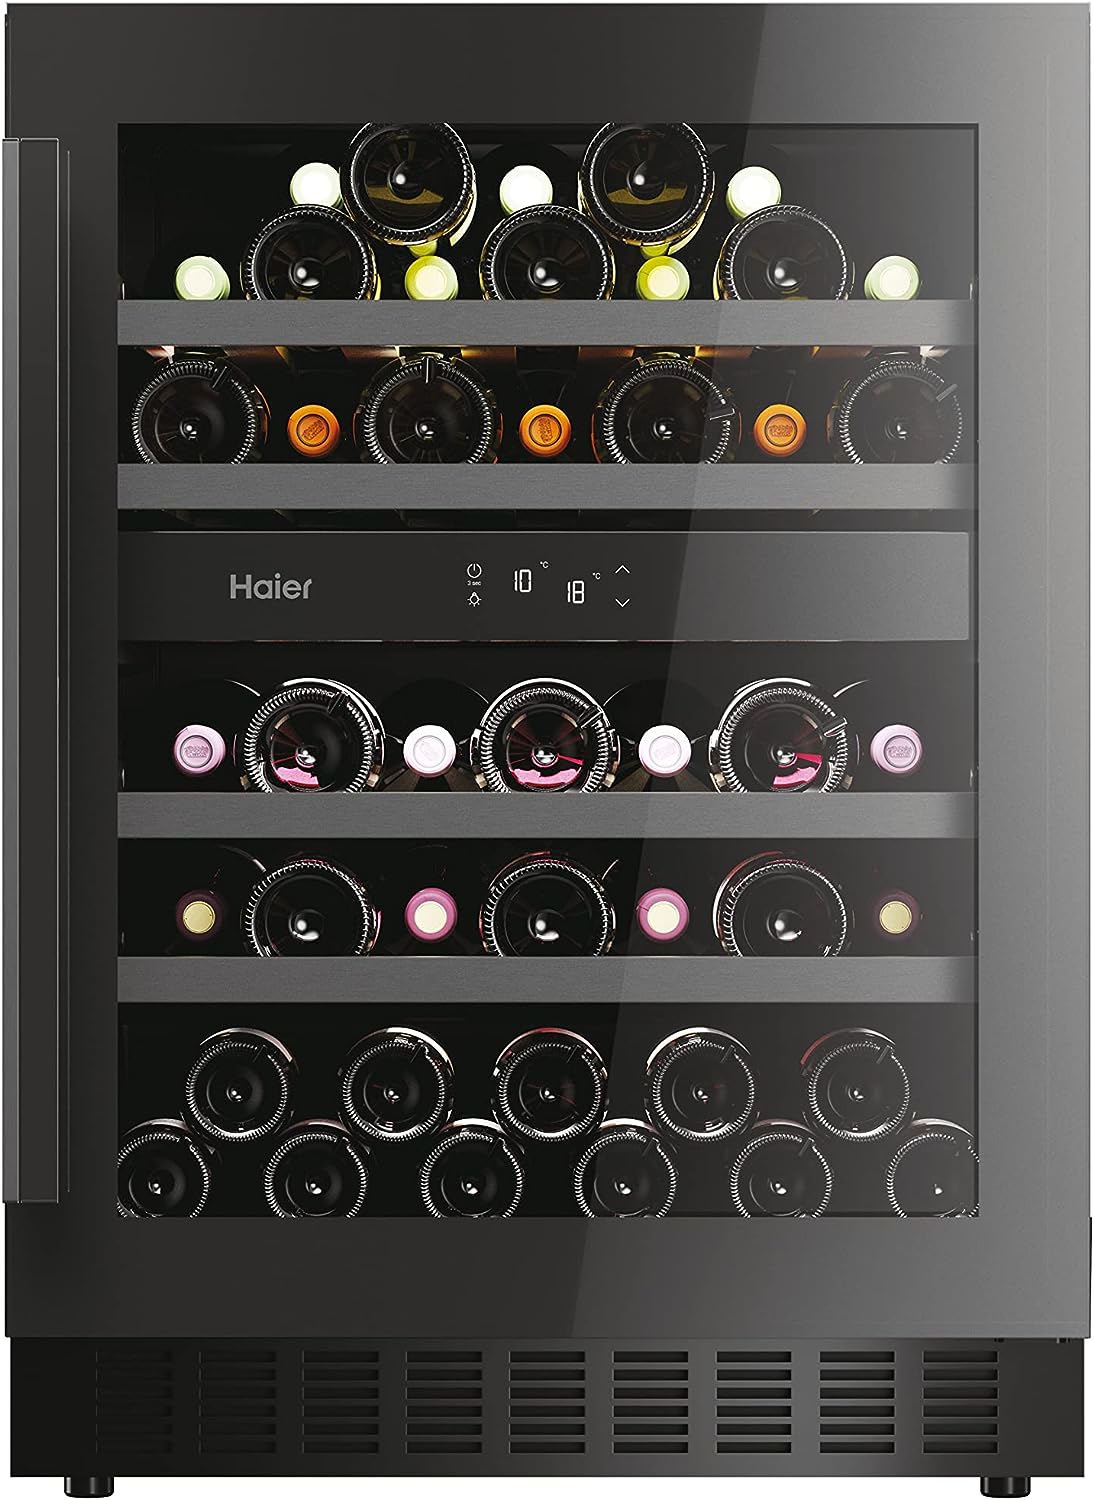 Haier H-Wine 700 HAKWBD 60 / Undermount Wine Climate Cabinet / 2 Temperature Zones for Red White and Sparkling Wine / Very Quiet / Space for 44 Bottles / LED Lighting / Touch Display / 4 Wooden Shelves